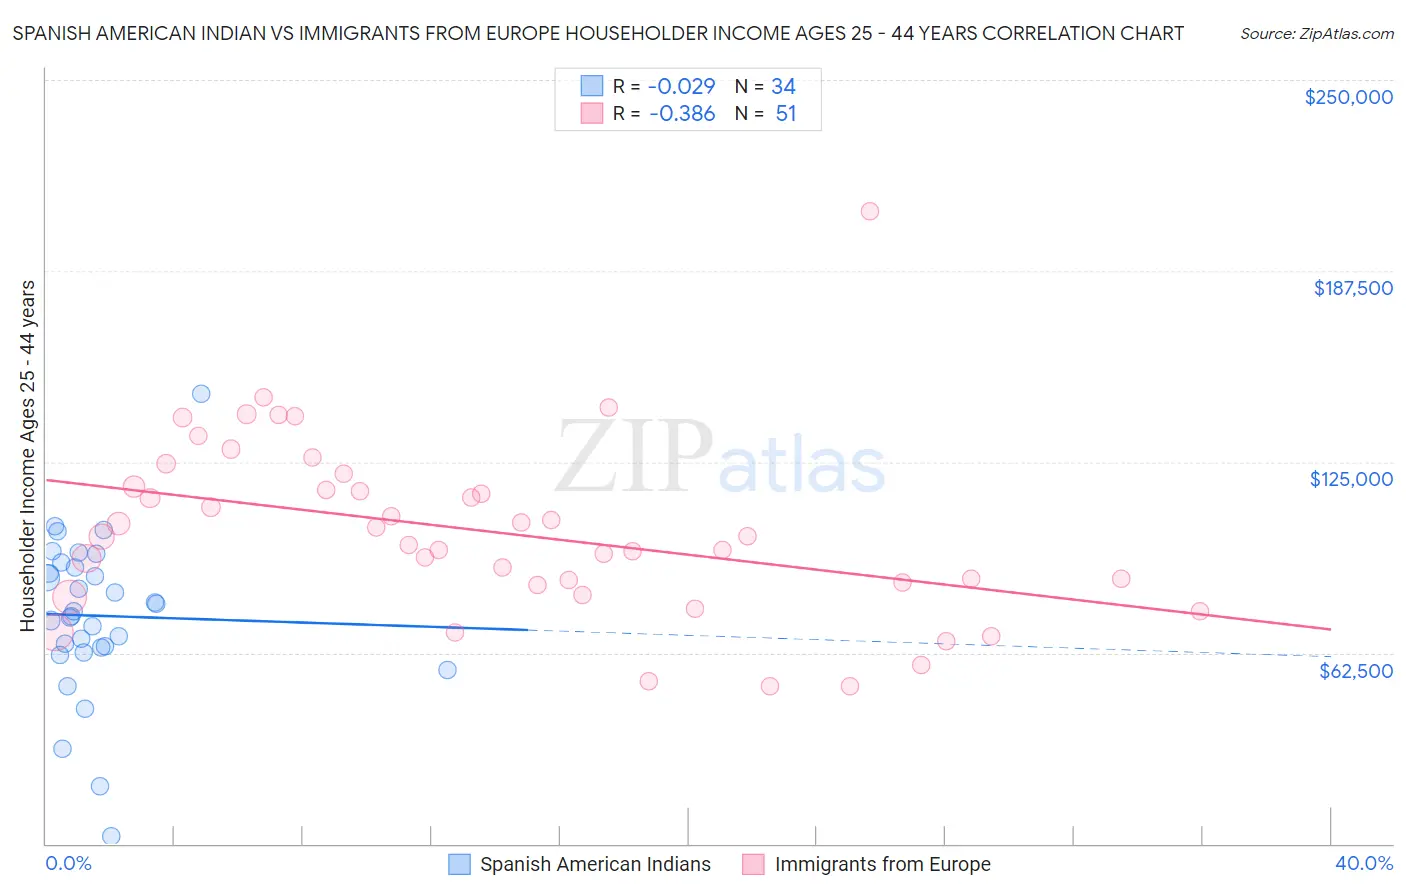 Spanish American Indian vs Immigrants from Europe Householder Income Ages 25 - 44 years